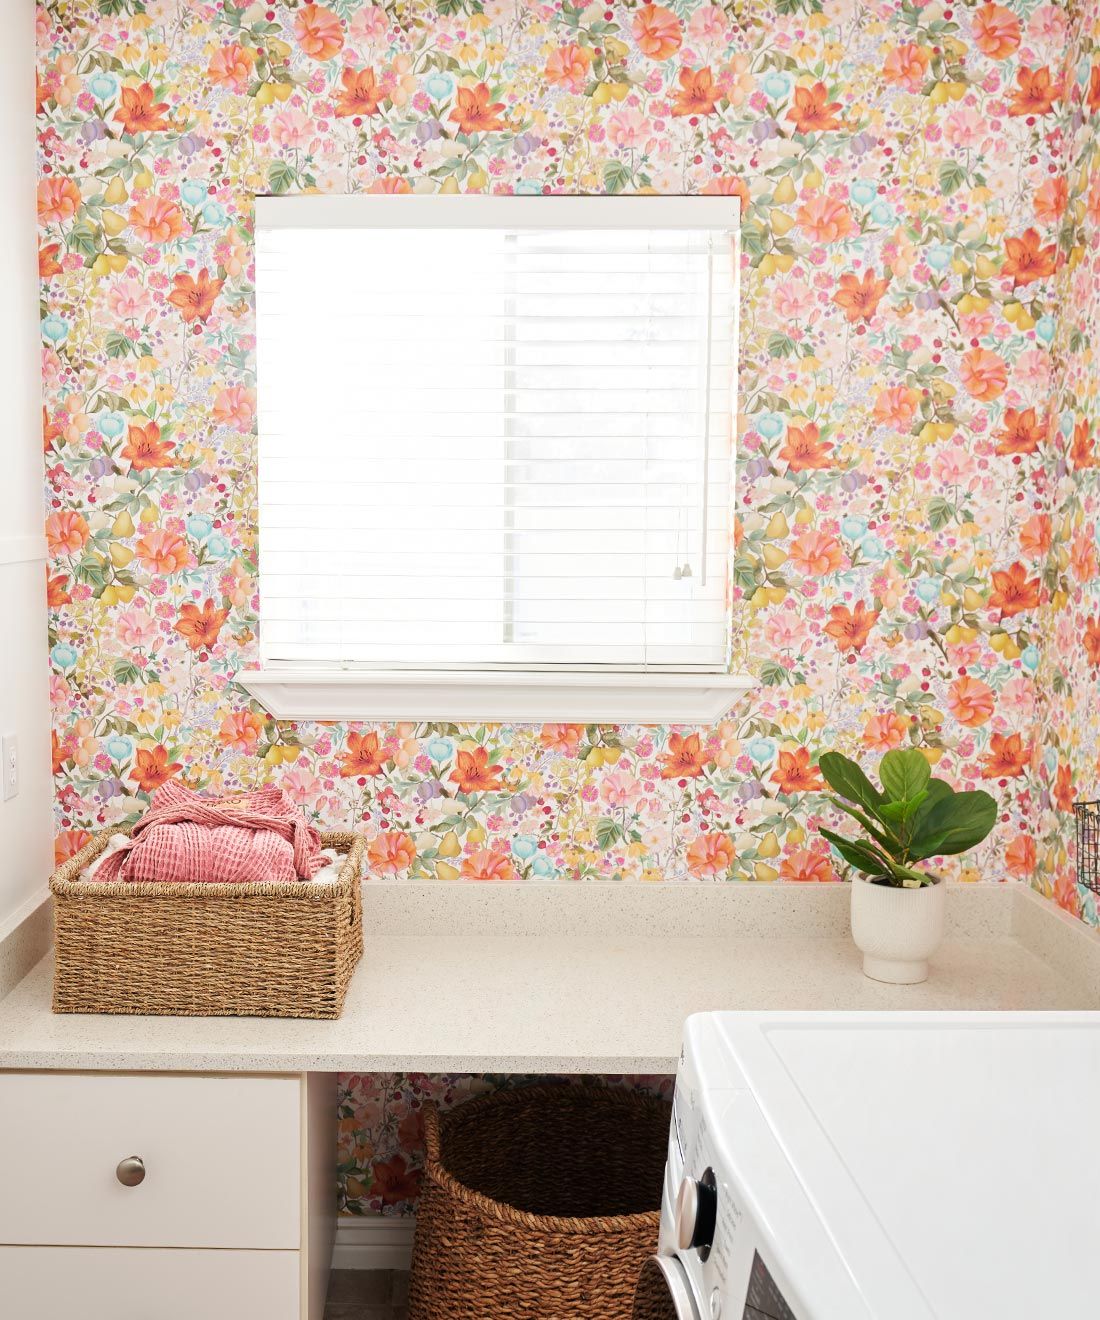 Abundance Wallpaper • Kip&Co • Colorful Floral Wallpaper • laundry room insitu with young girl sitting on washing machine by Morgan Pederson